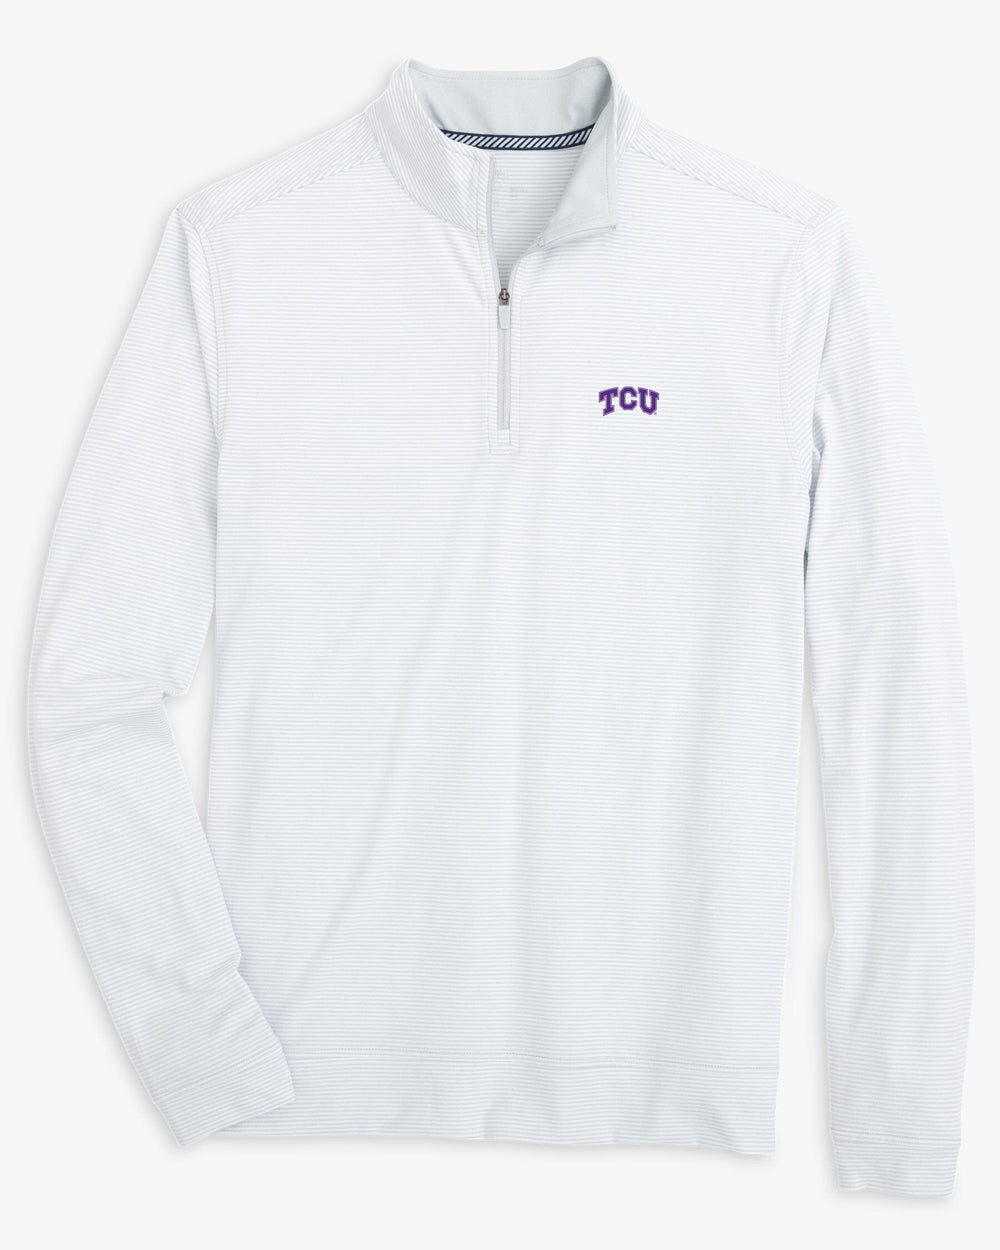 The front view of the TCU Horned Frogs Cruiser Micro-Stripe Heather Quarter Zip by Southern Tide - Heather Slate Grey